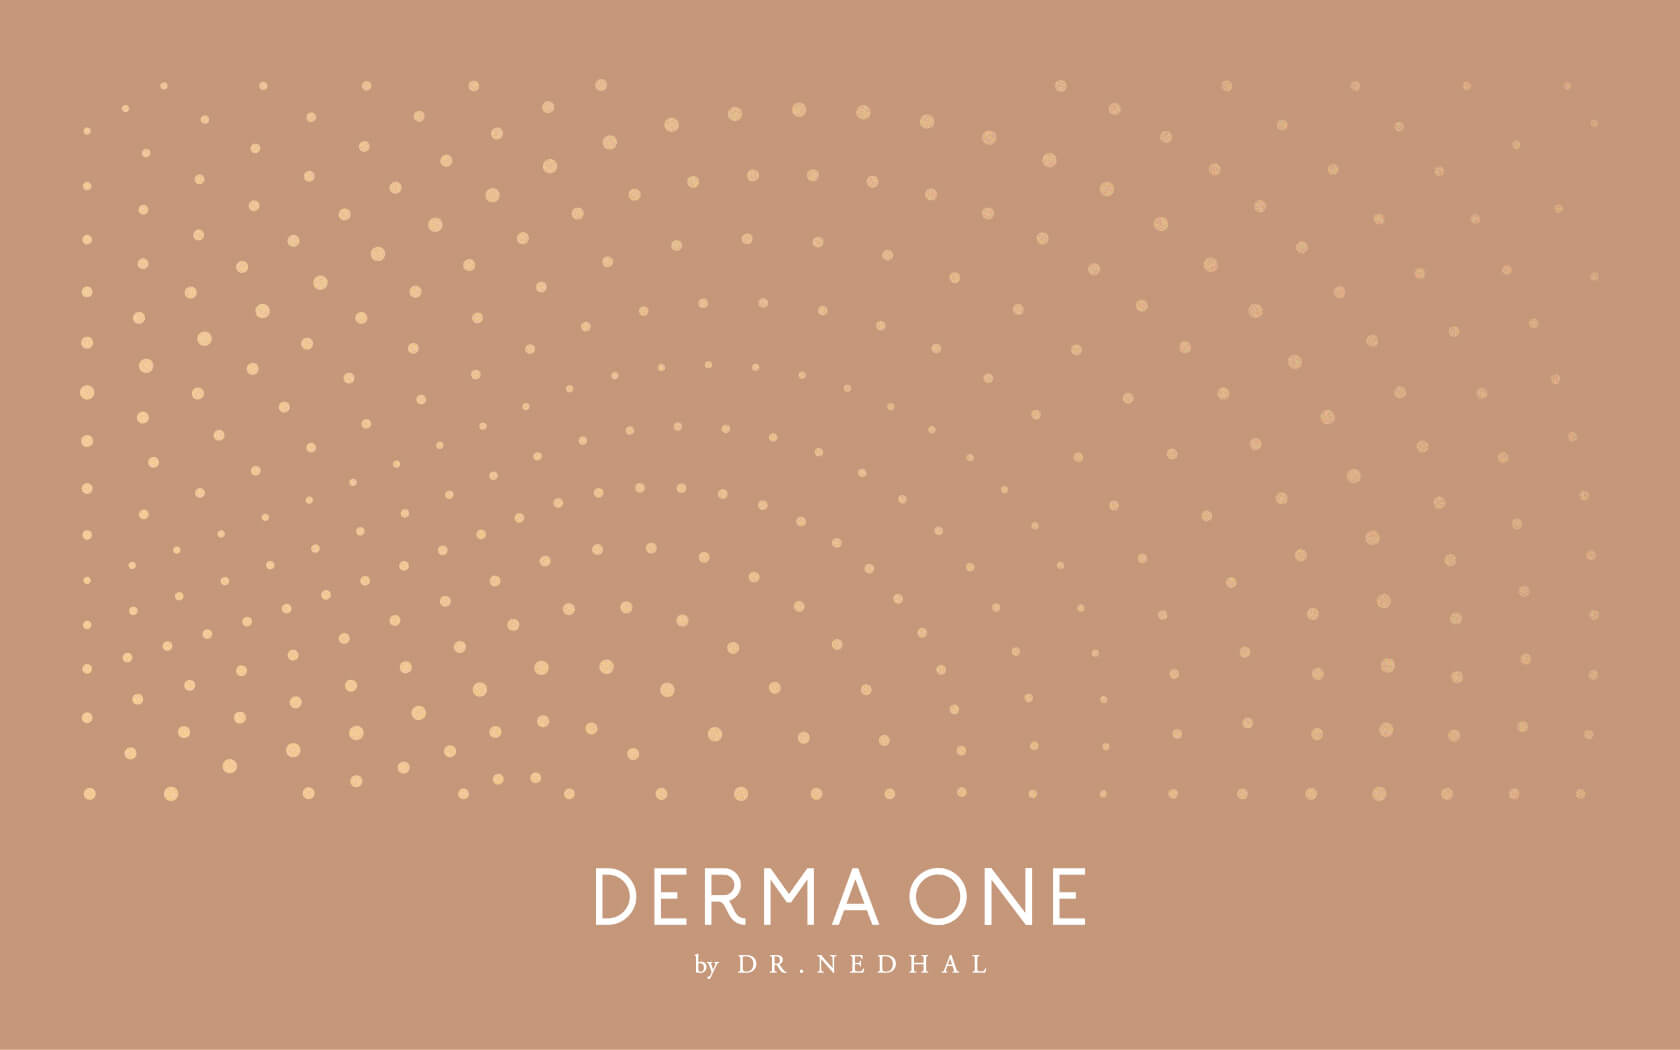 Derma One. Graphic 5th element with brand logo